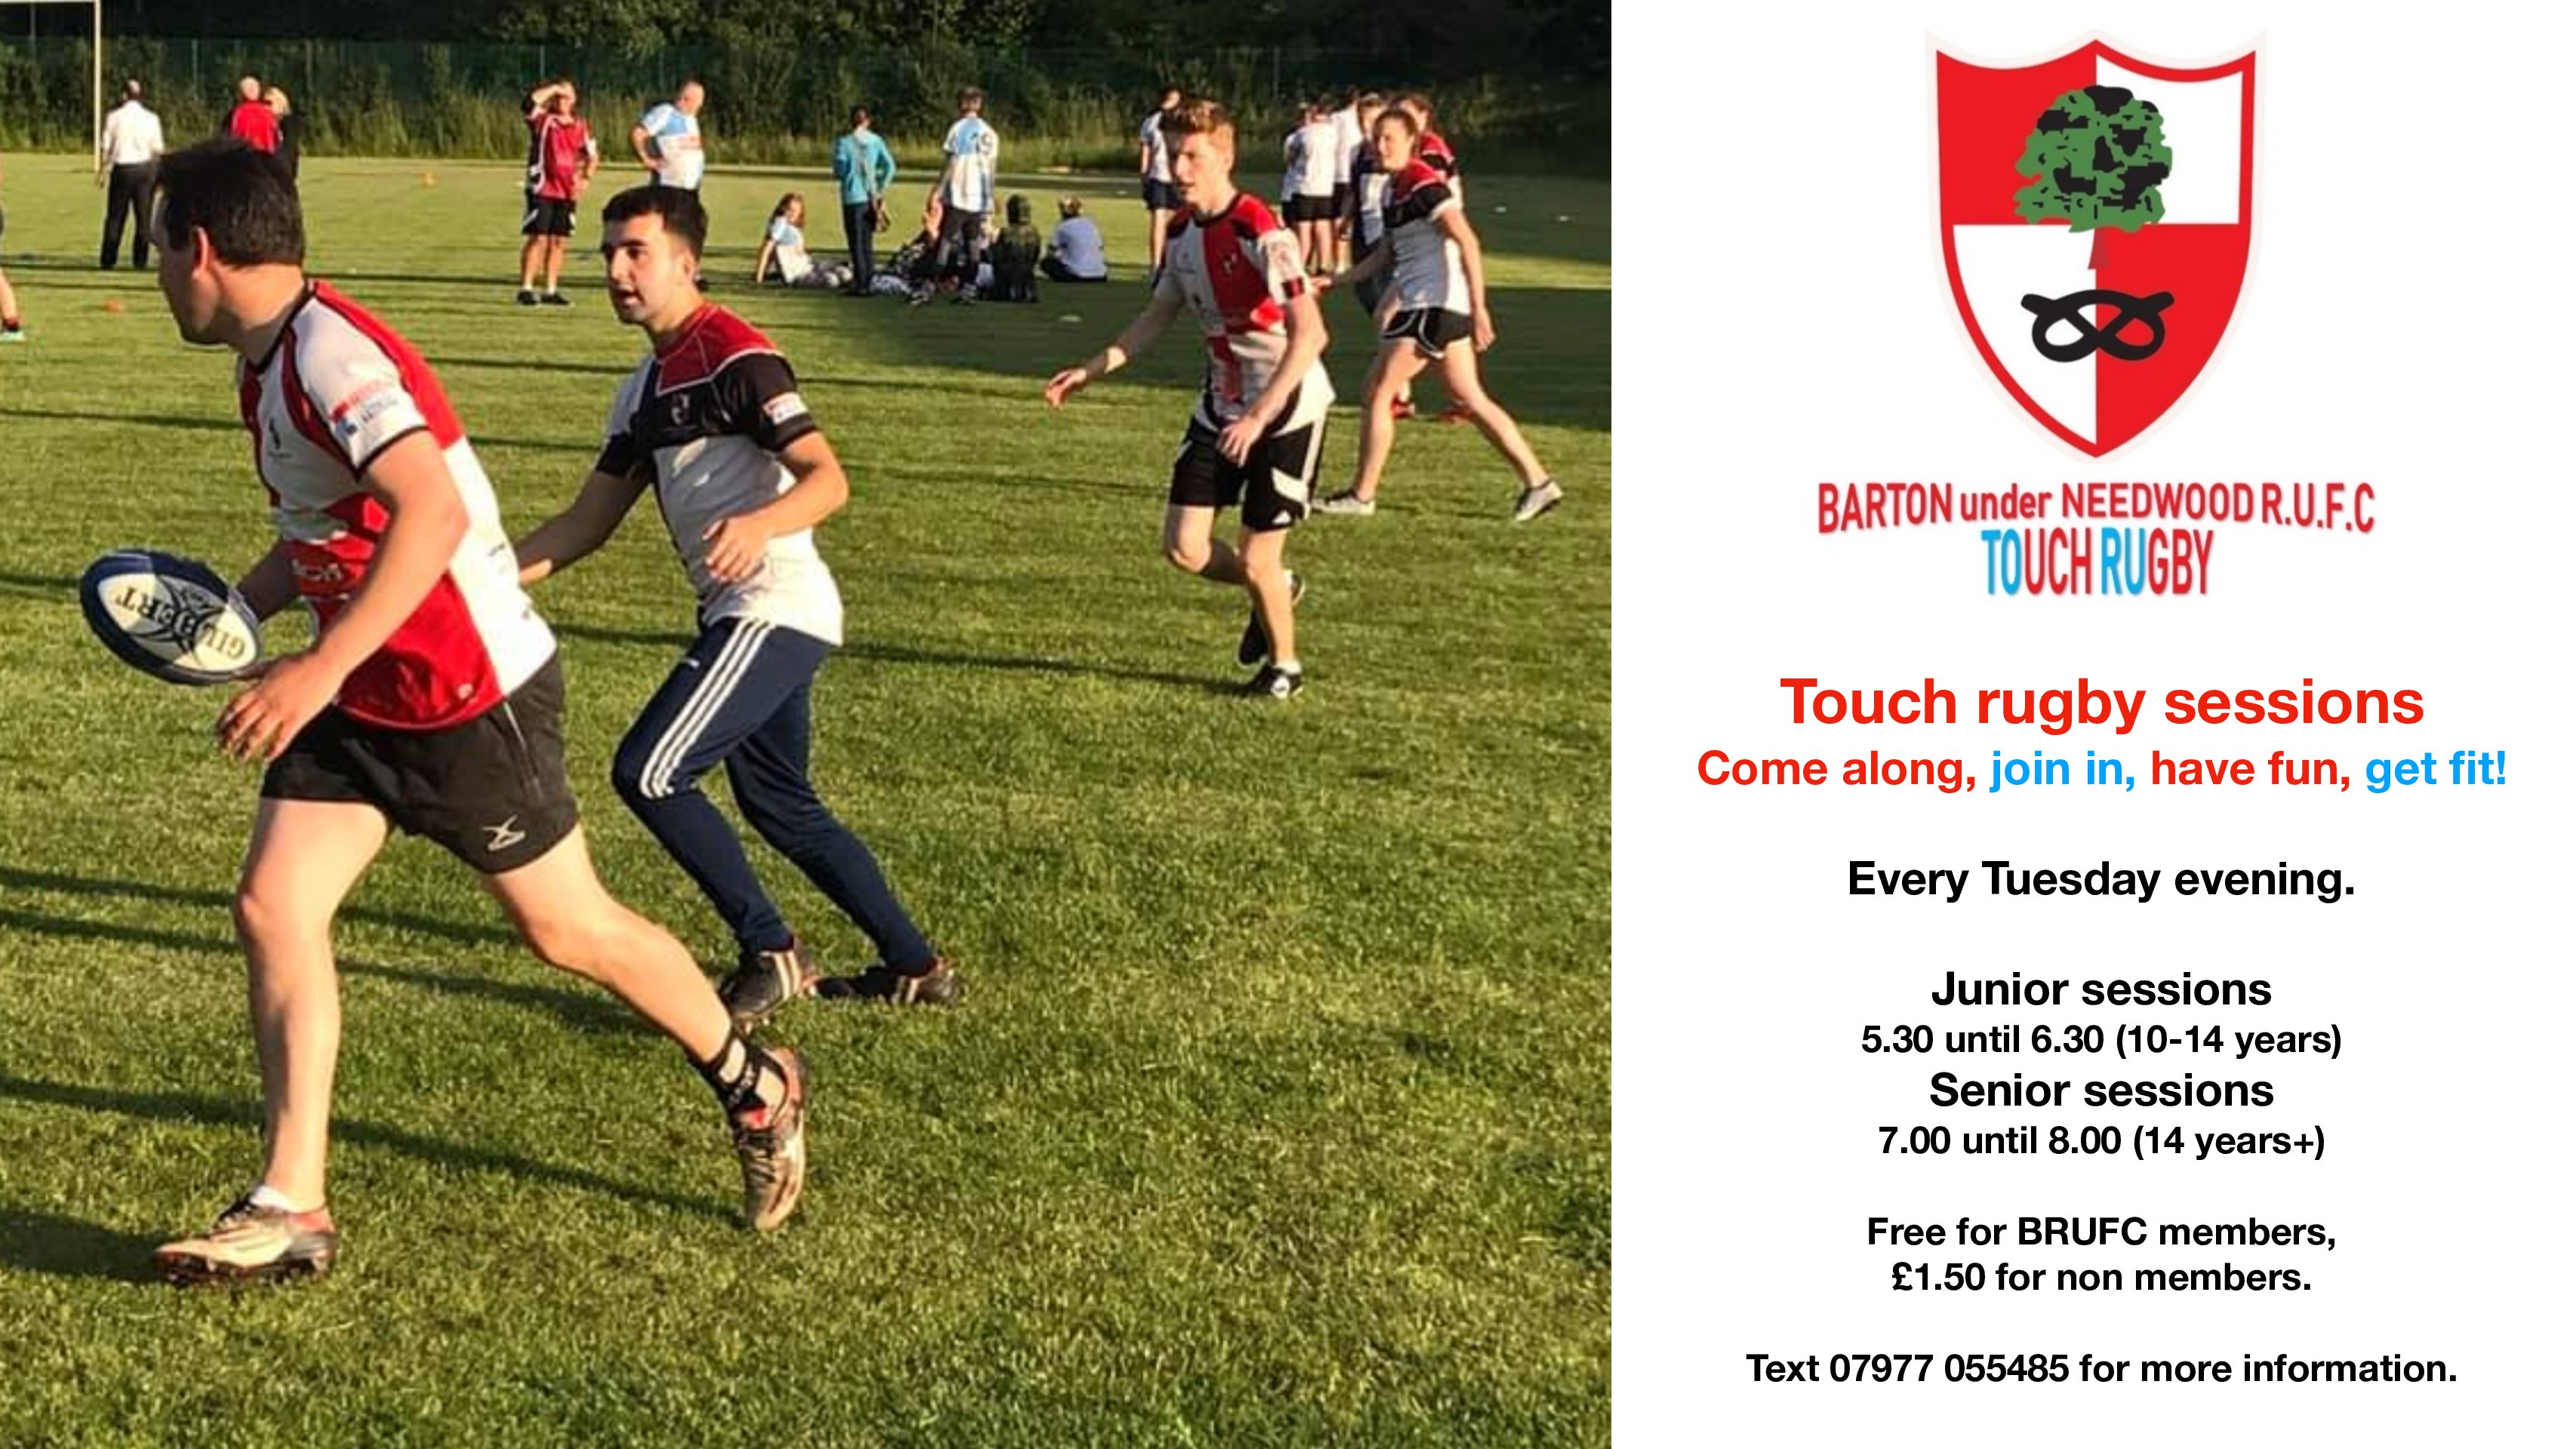 Barton under Needwood R.U.F.C. – Touch Rugby Sessions